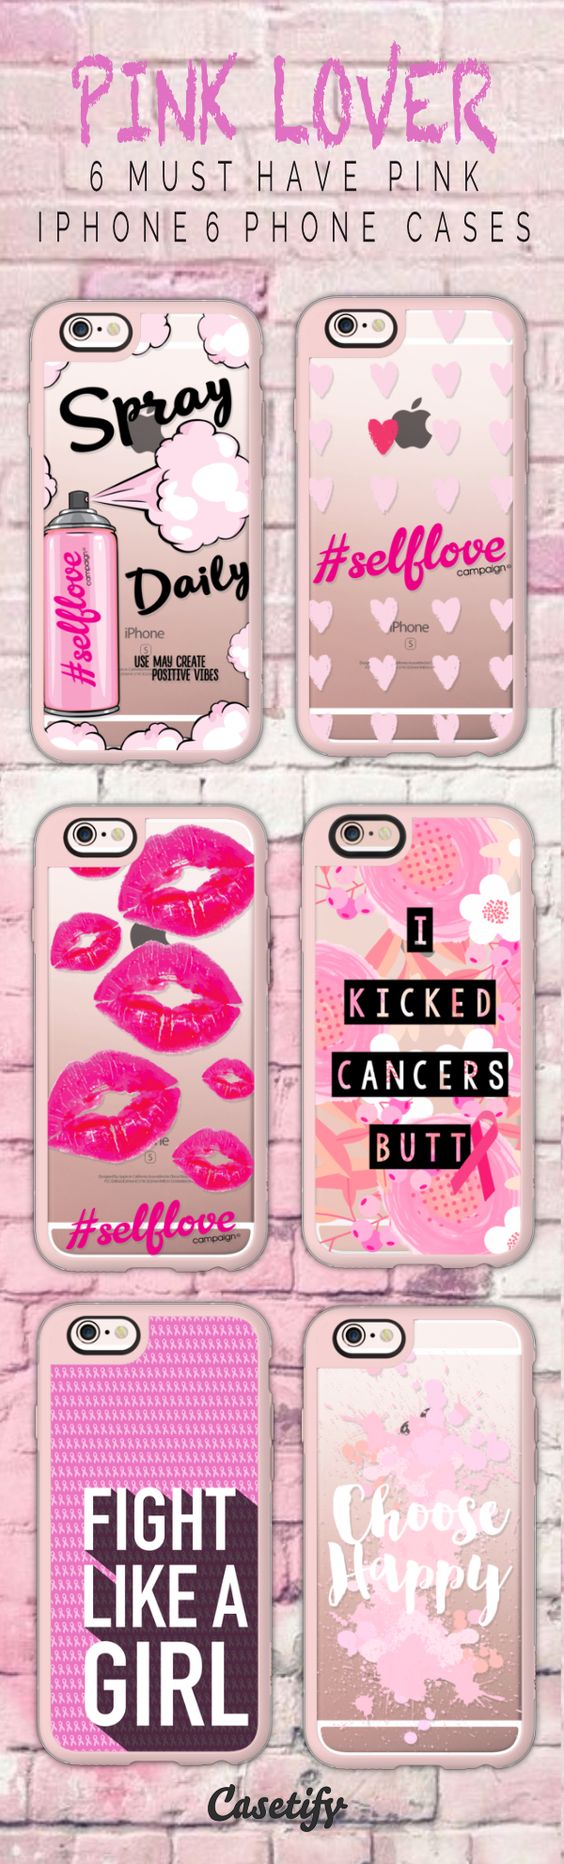 Most must have pink iPhone 6 protective phone case designs | Click through to see more iphone phone case ideas   #quote | @Casetify